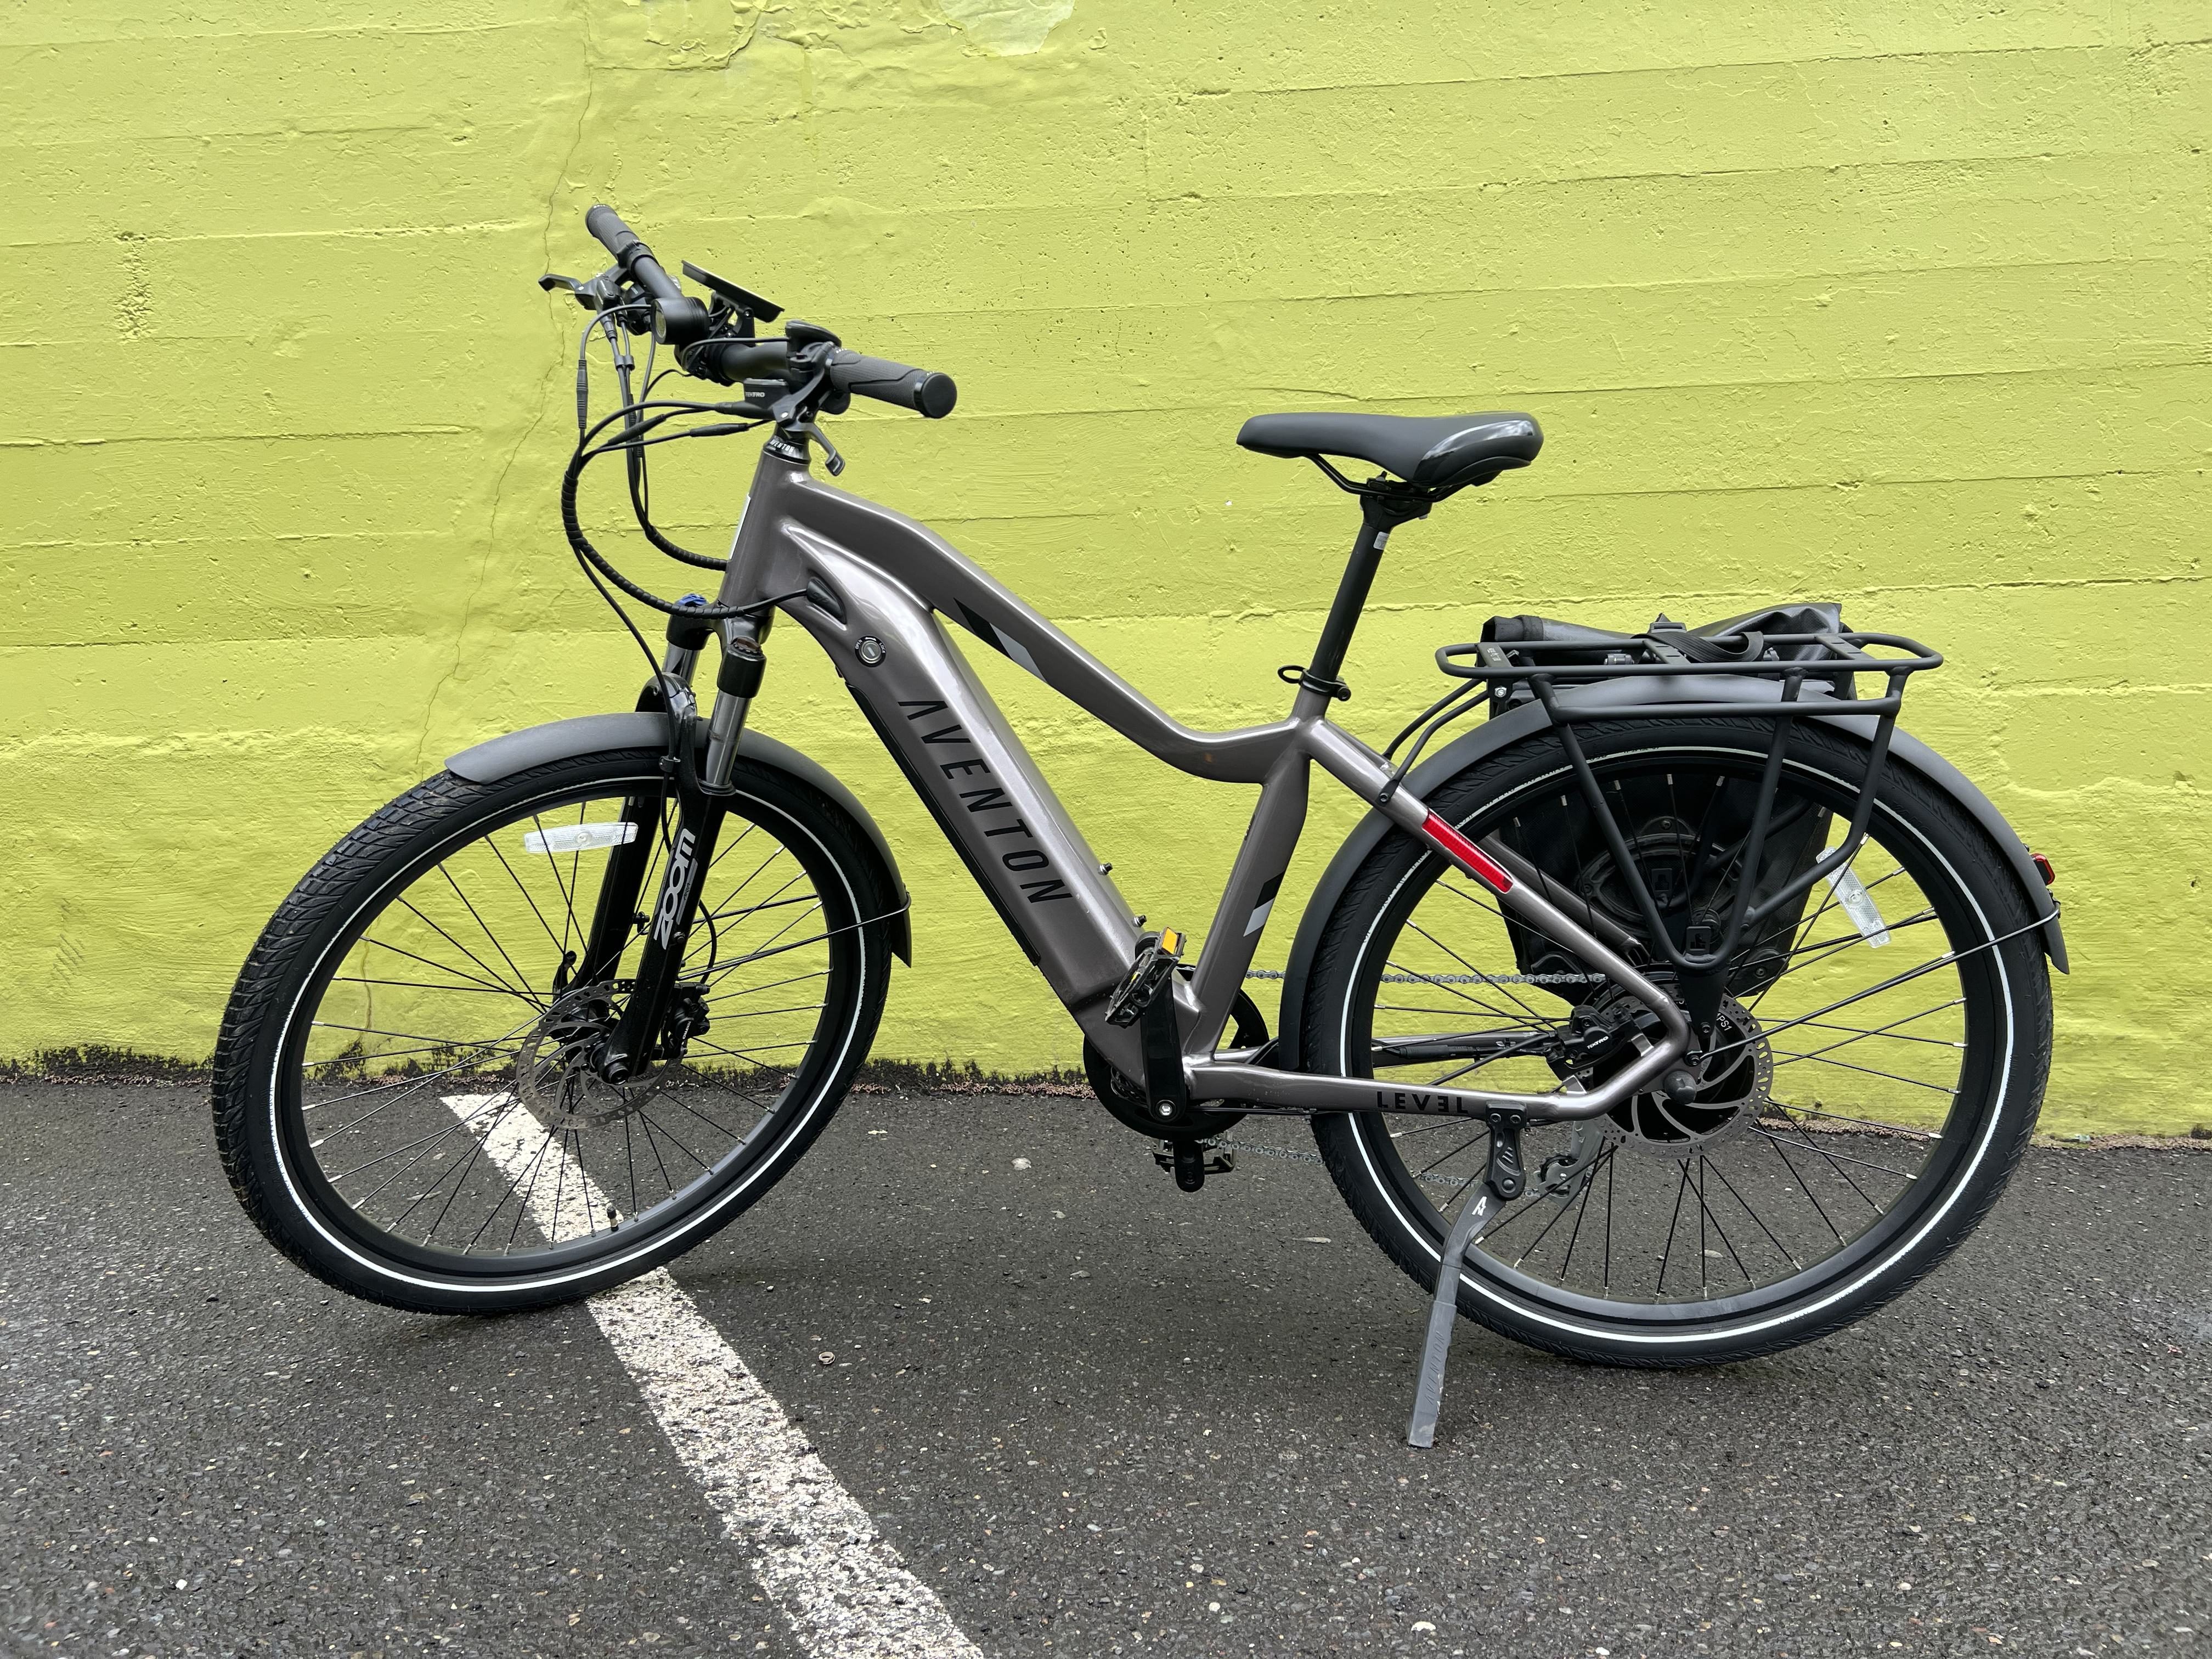 An Aventon Level 2 ebike sits outside a grocery store.